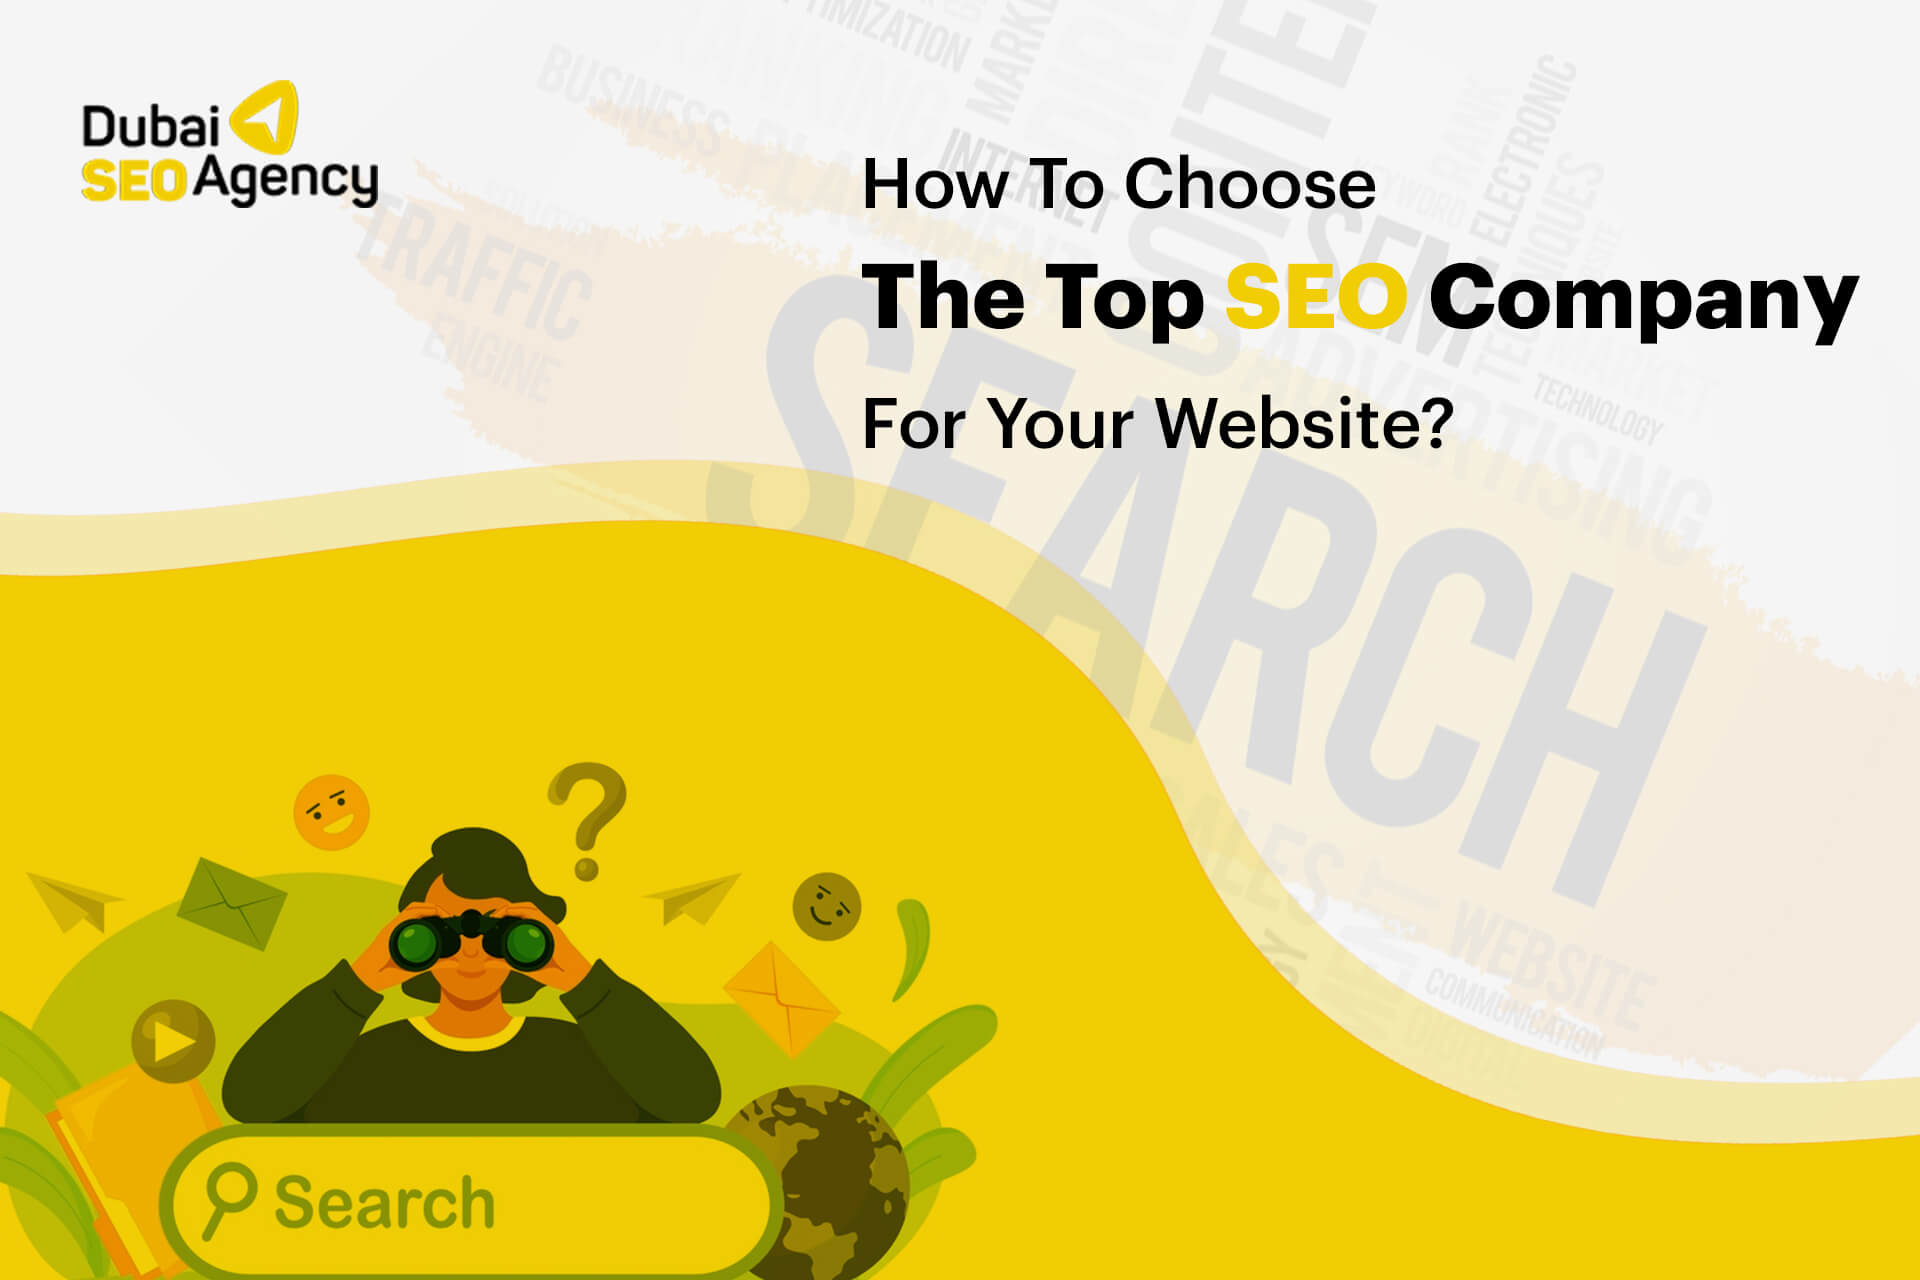 How To Choose The Top SEO Company For Your Website?